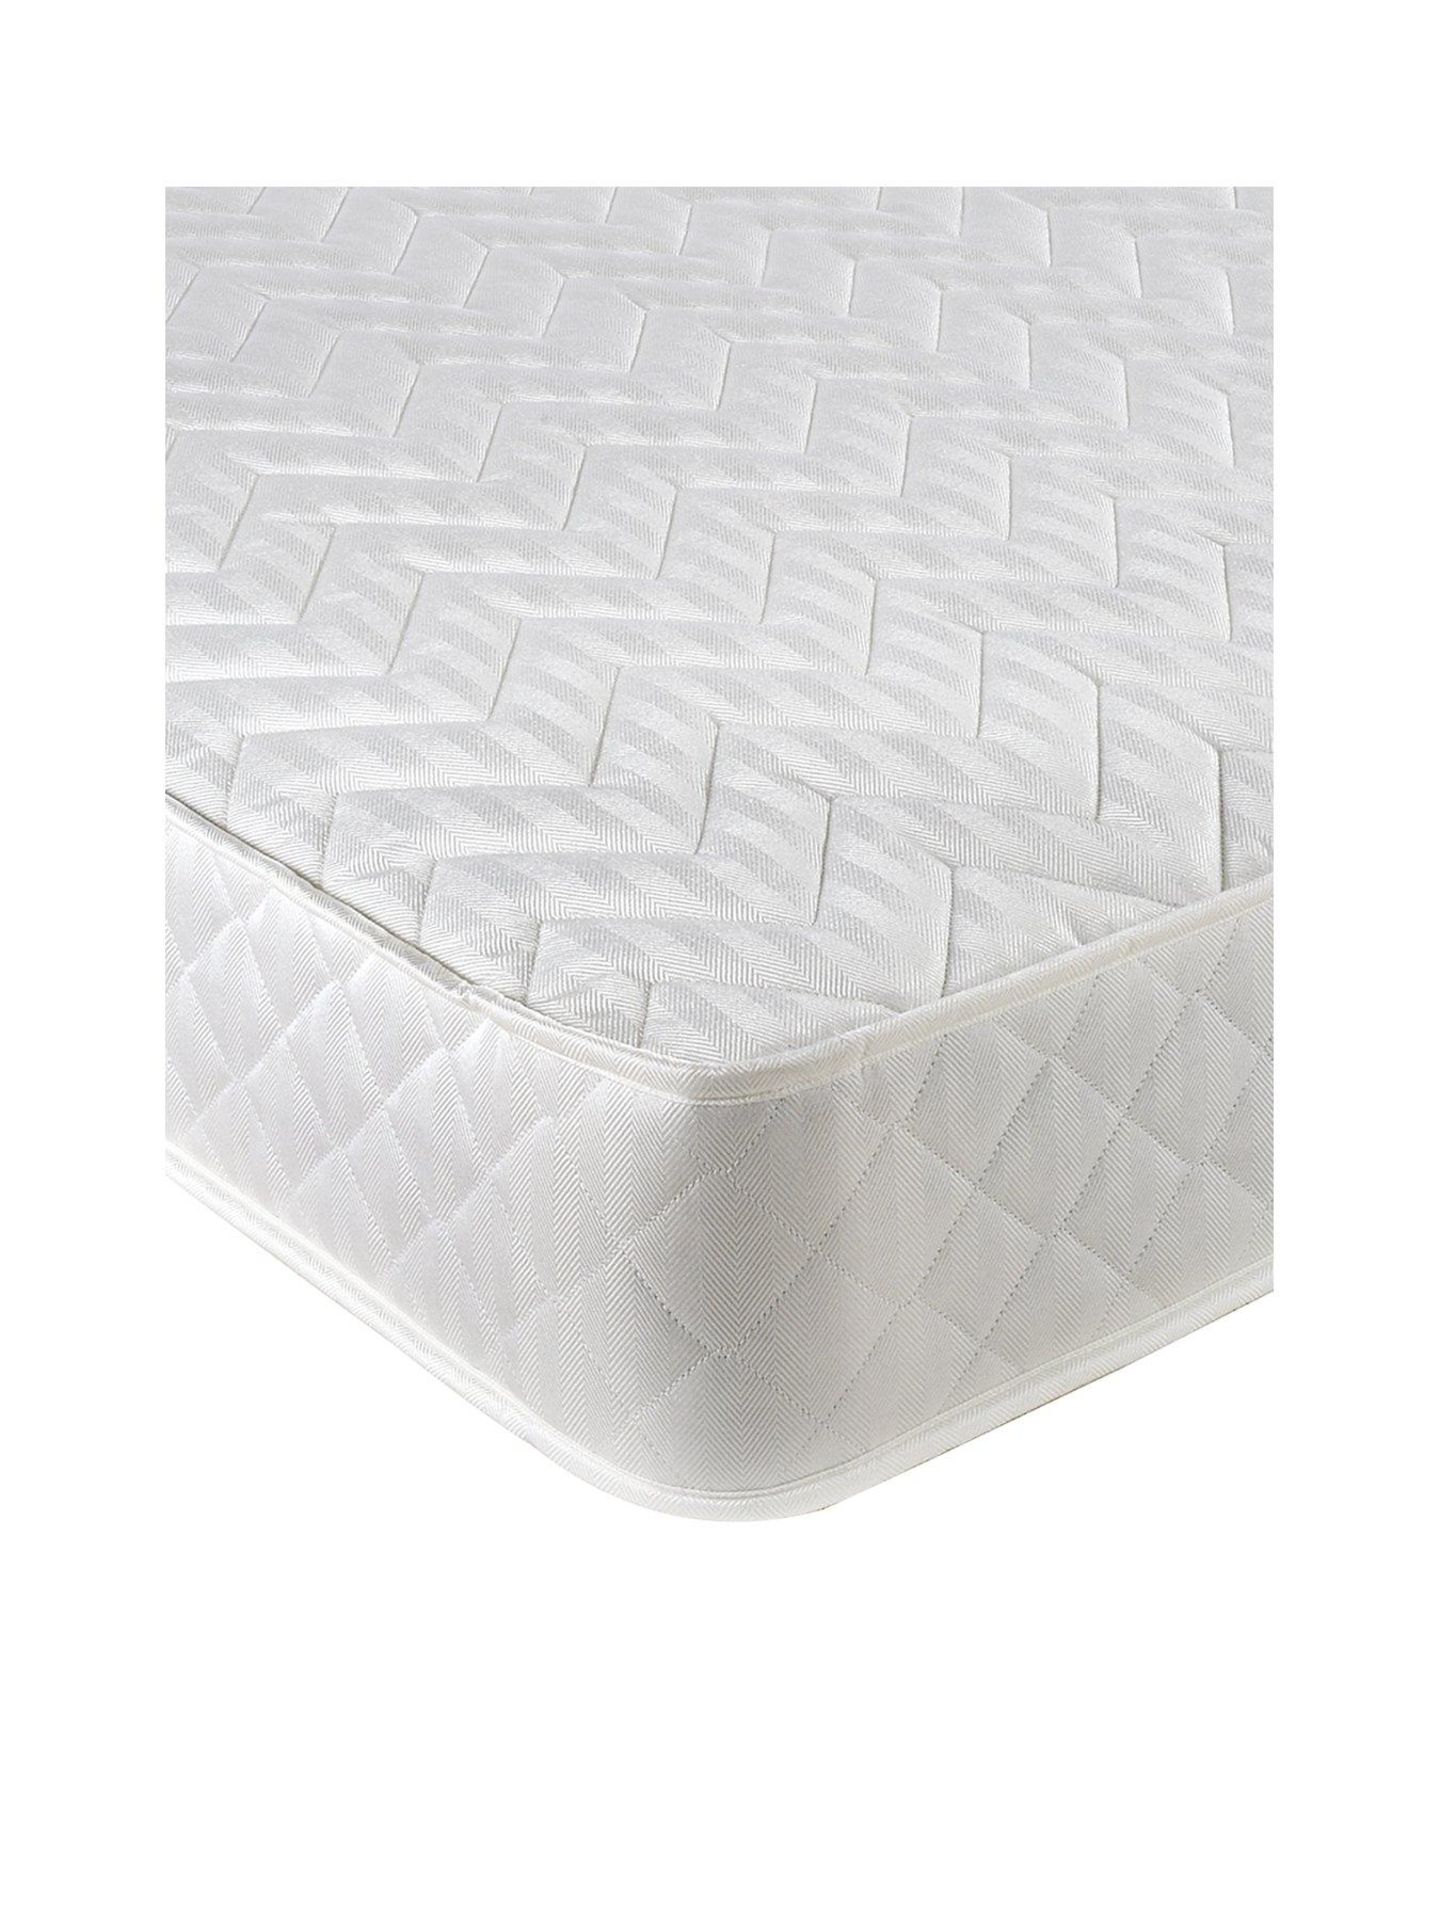 Boxed Item Airsprung Luxury Quilted King Medium Mattress [] 20X150X200Cm Rrp:£298.0